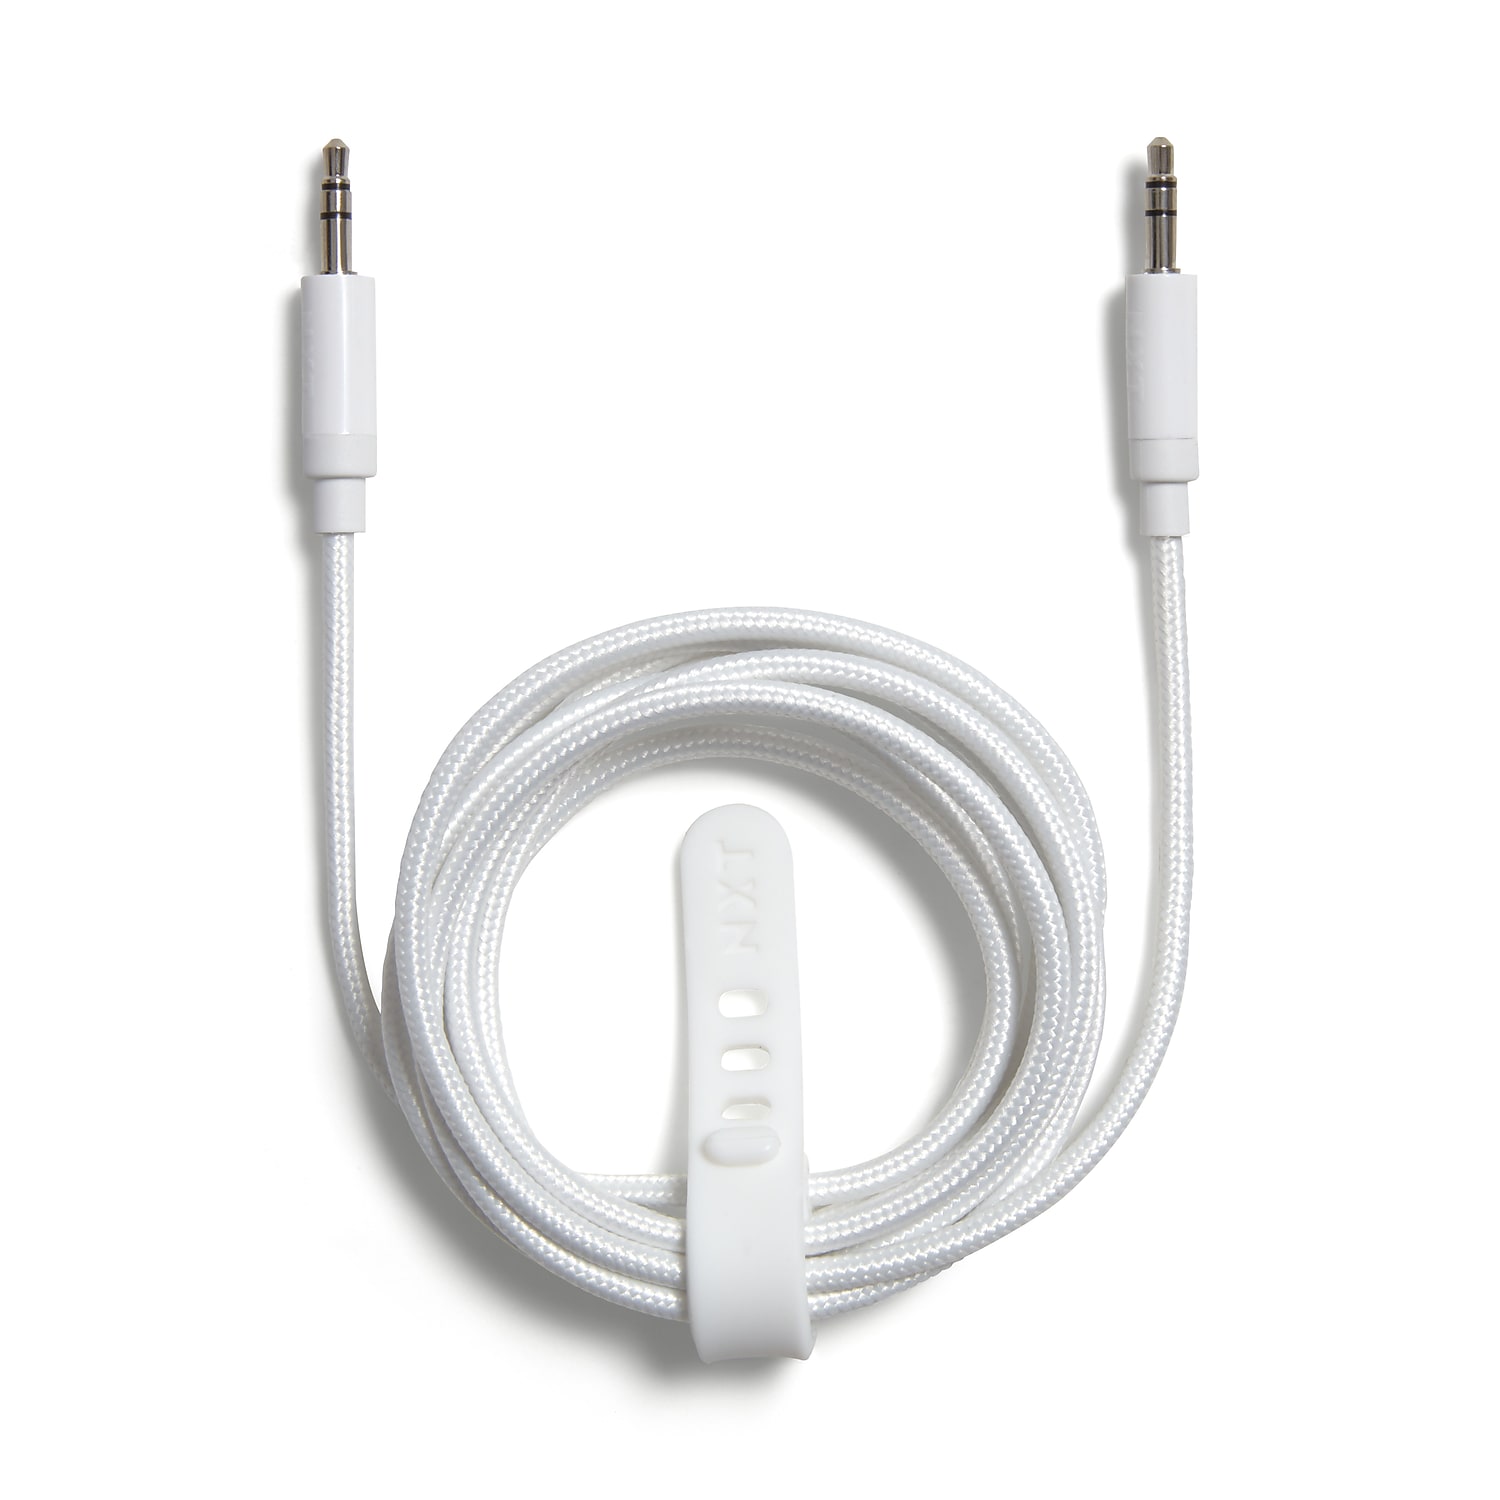 6' NXT Technologies Braided Stereo Aux Mini 3.5mm Cable: White $1.15 or Black $1.35 w/ 2% SD Cashback + Free Curbside Pickup